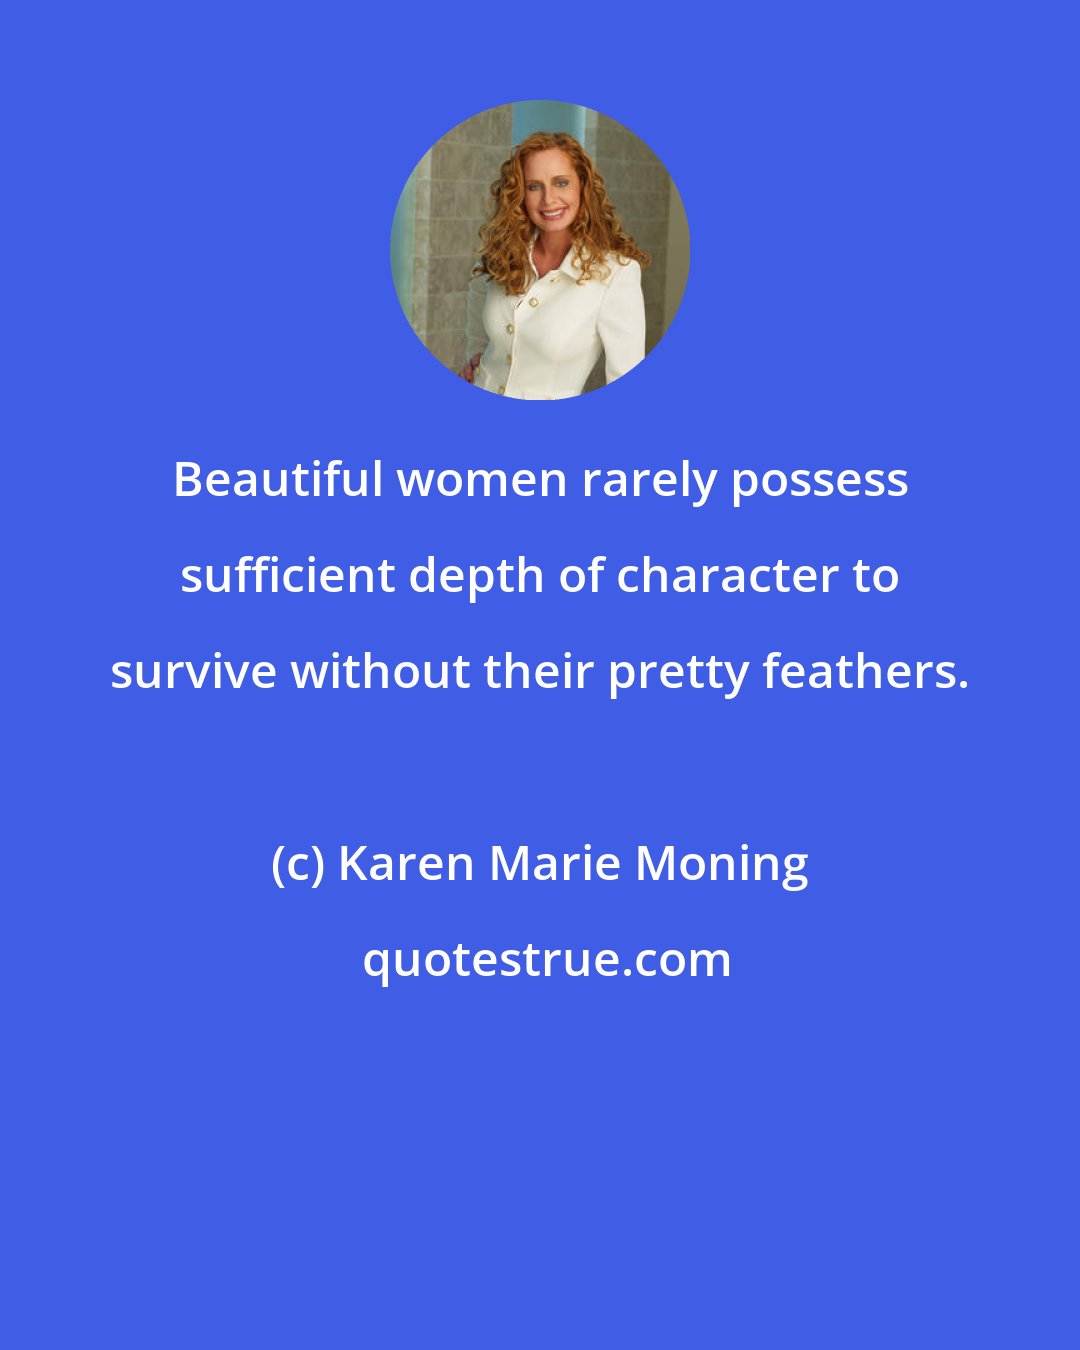 Karen Marie Moning: Beautiful women rarely possess sufficient depth of character to survive without their pretty feathers.